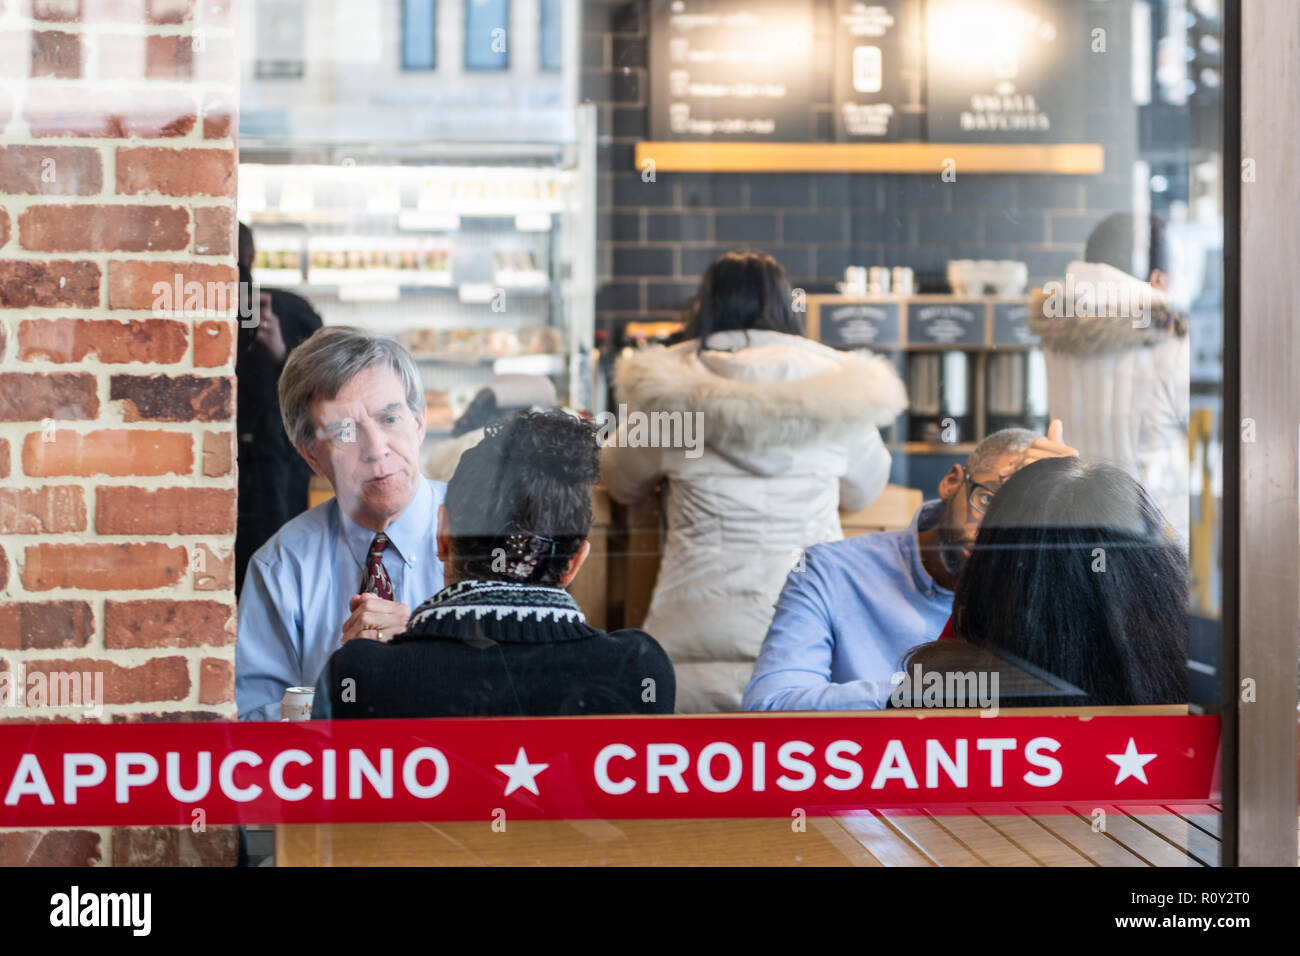 Washington DC, USA - March 9, 2018: Pret a Manger sandwich store, shop, cafe window, see through, reflection, people, woman, man sitting by table eati Stock Photo